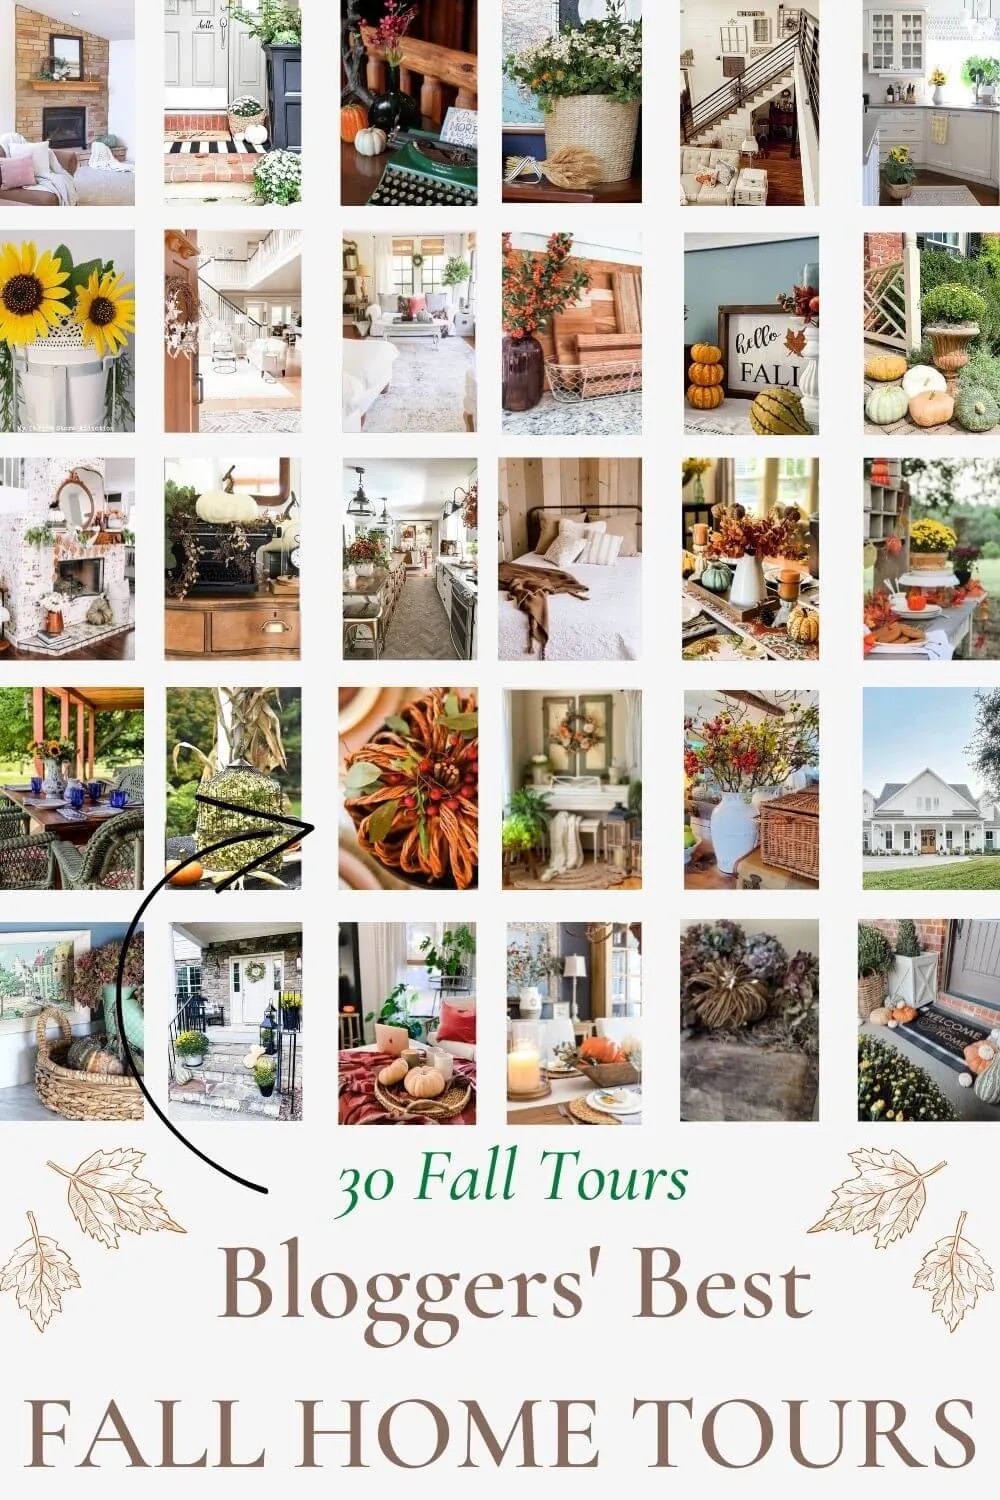 Fall Home Tour 2021 featured by top AL home blogger, She Gave It A Go